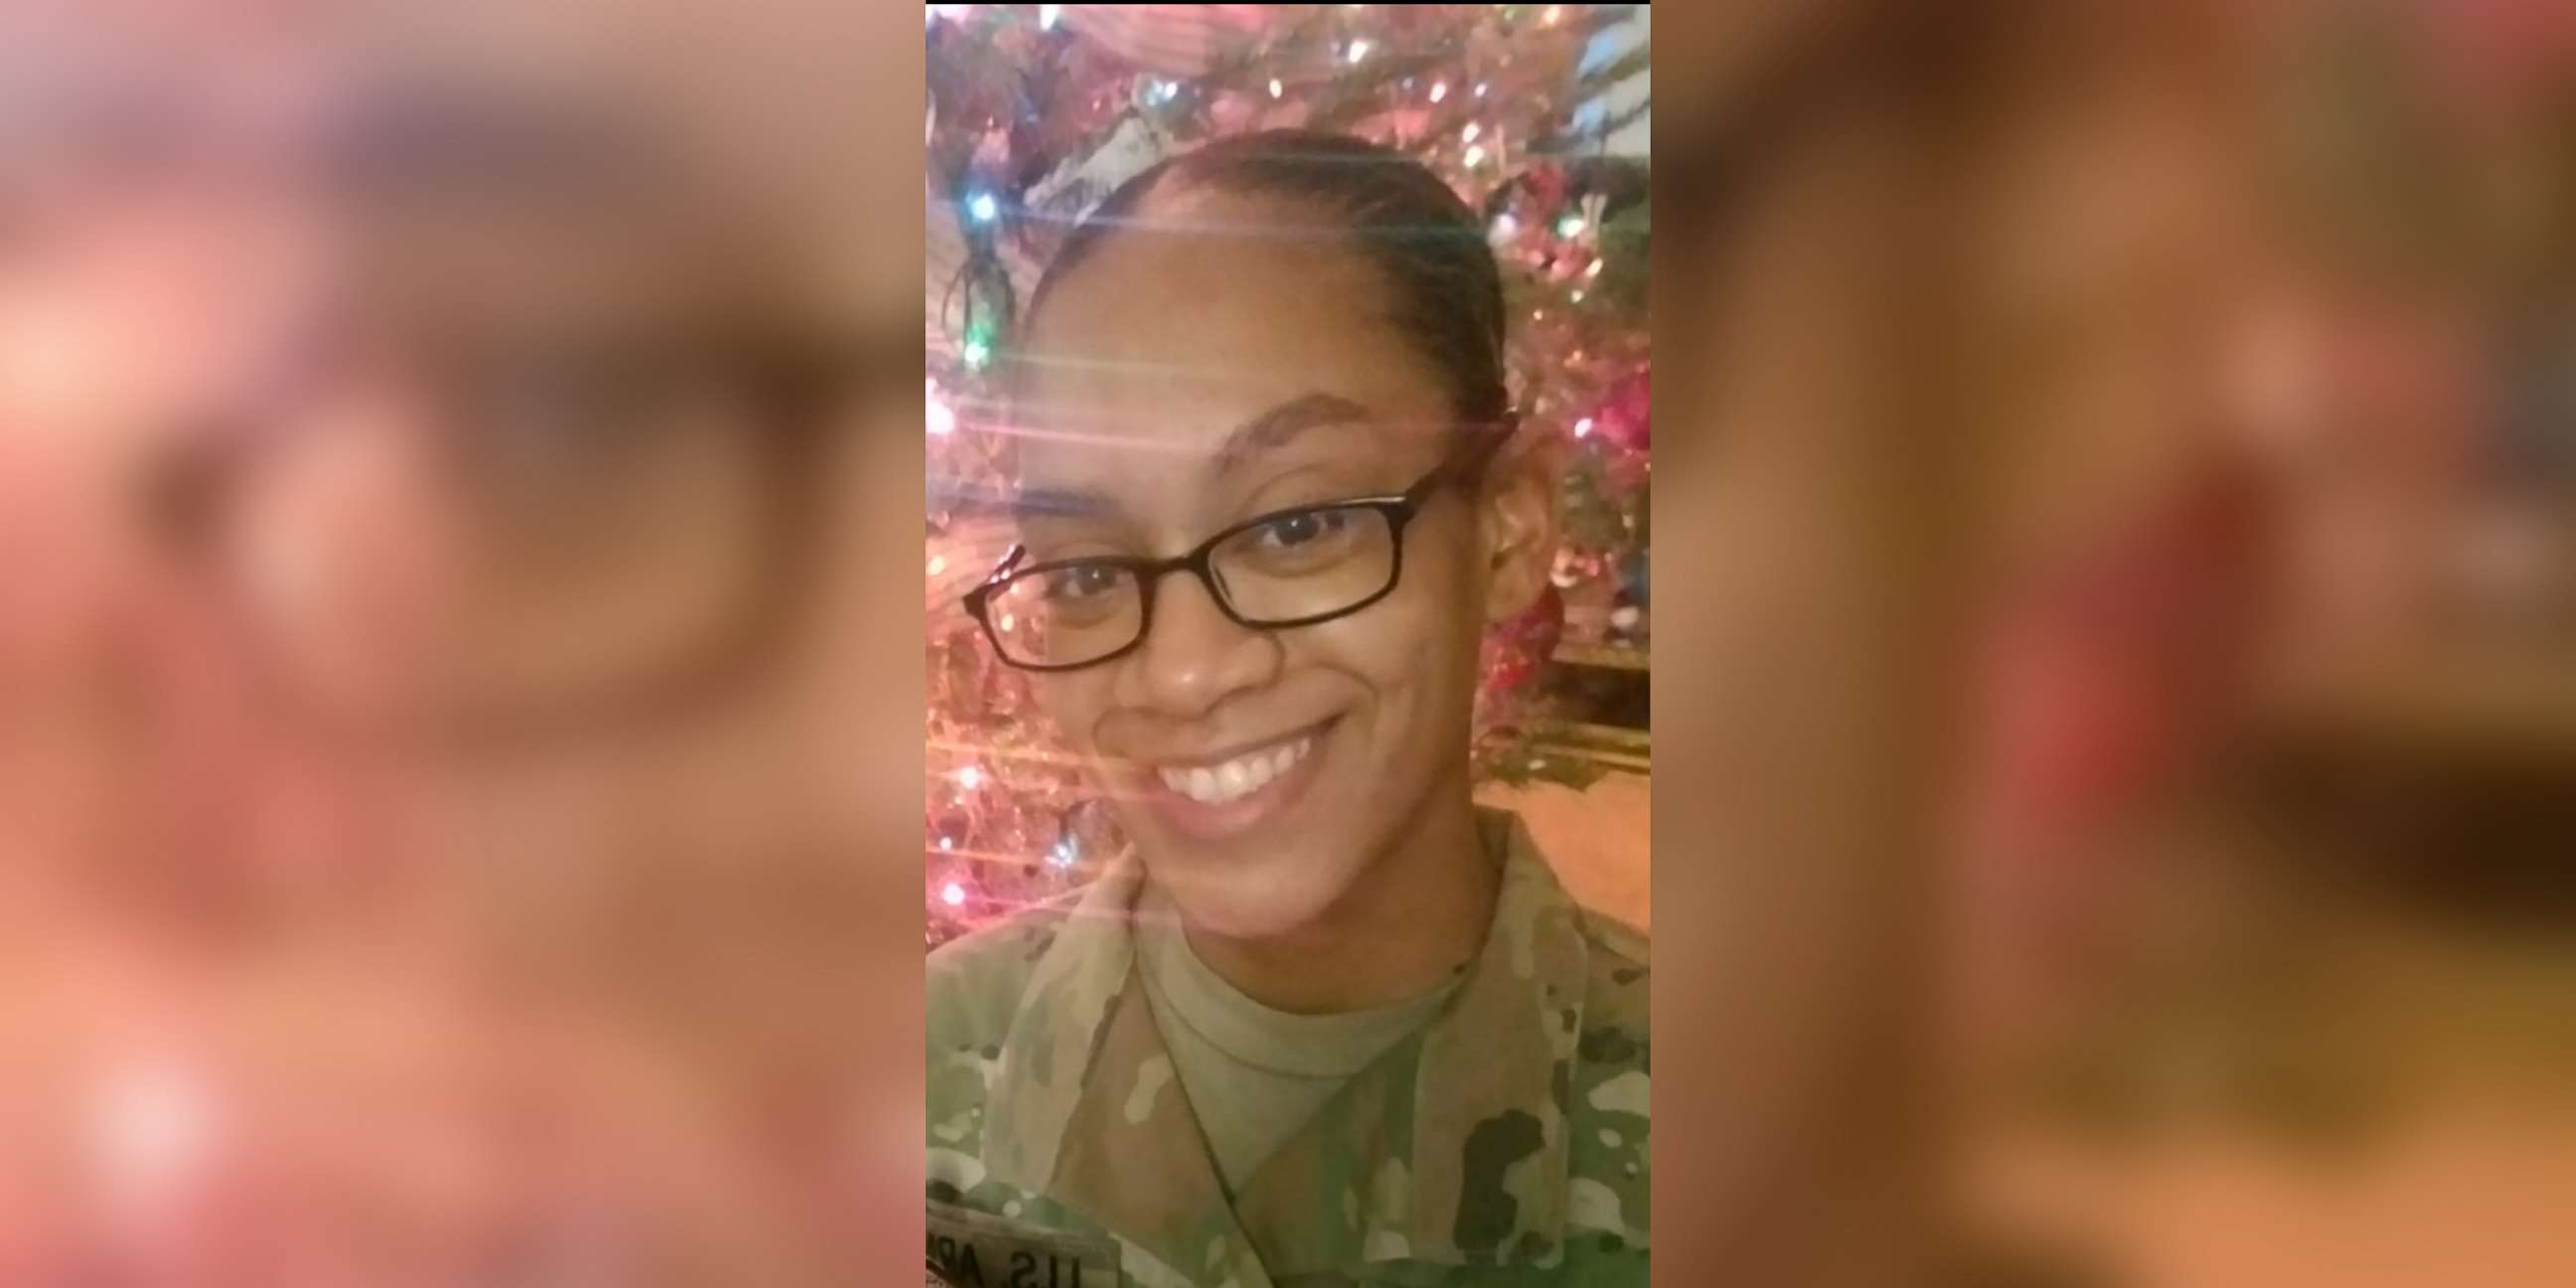 PHOTO: Fort Hood has released this image of missing soldier, Jennifer Sewell, Oct. 10, 2021, in hopes the public can help locate her.